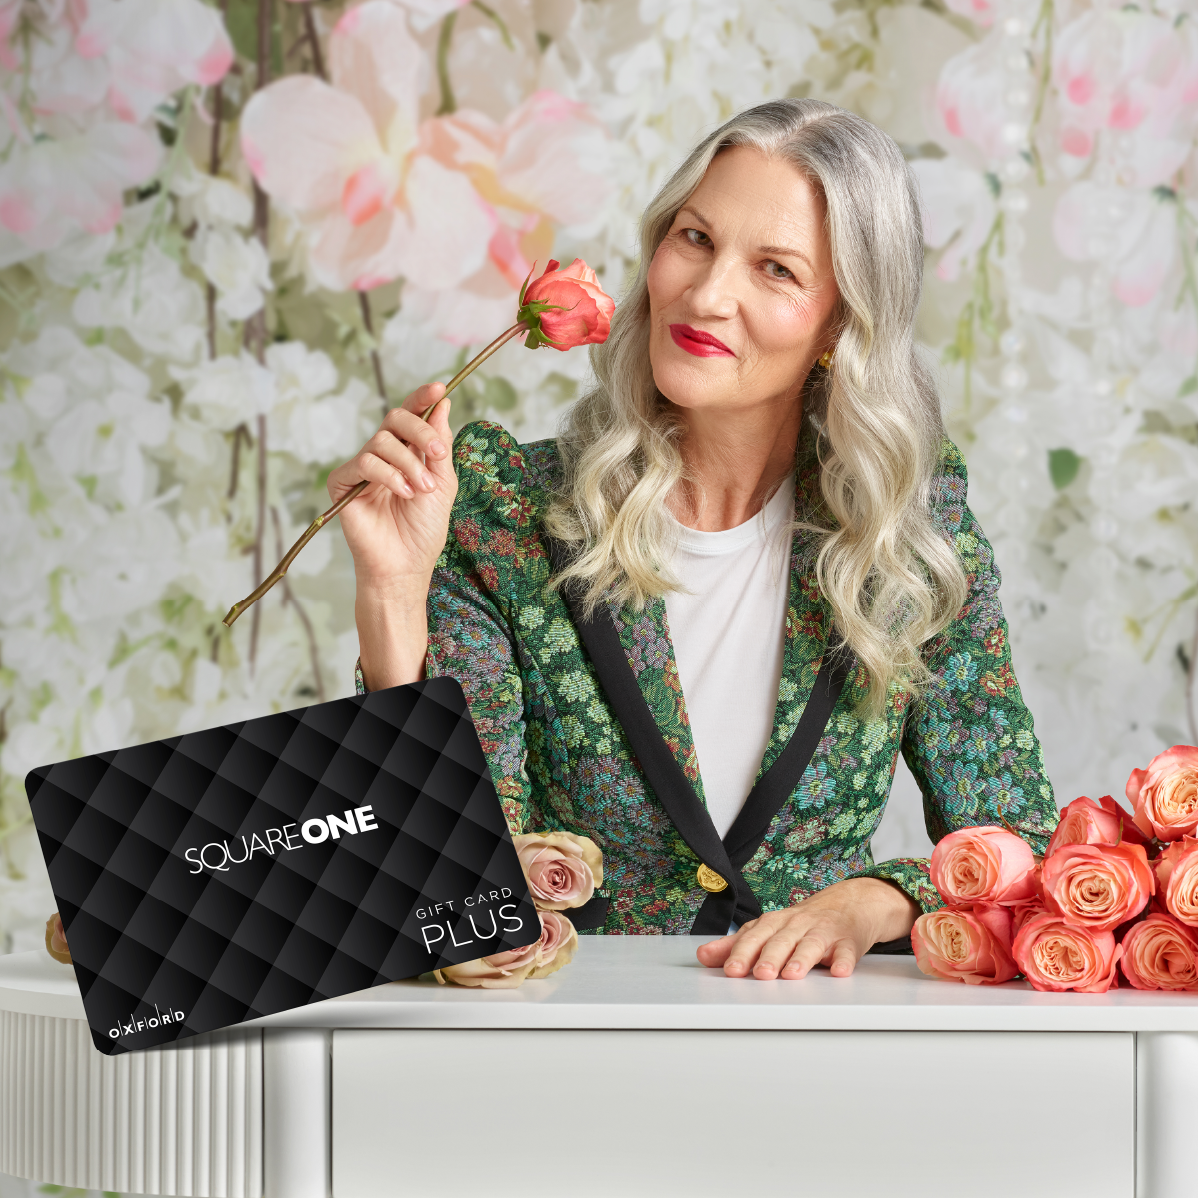 Woman holding roses posing with a gift card from Square One